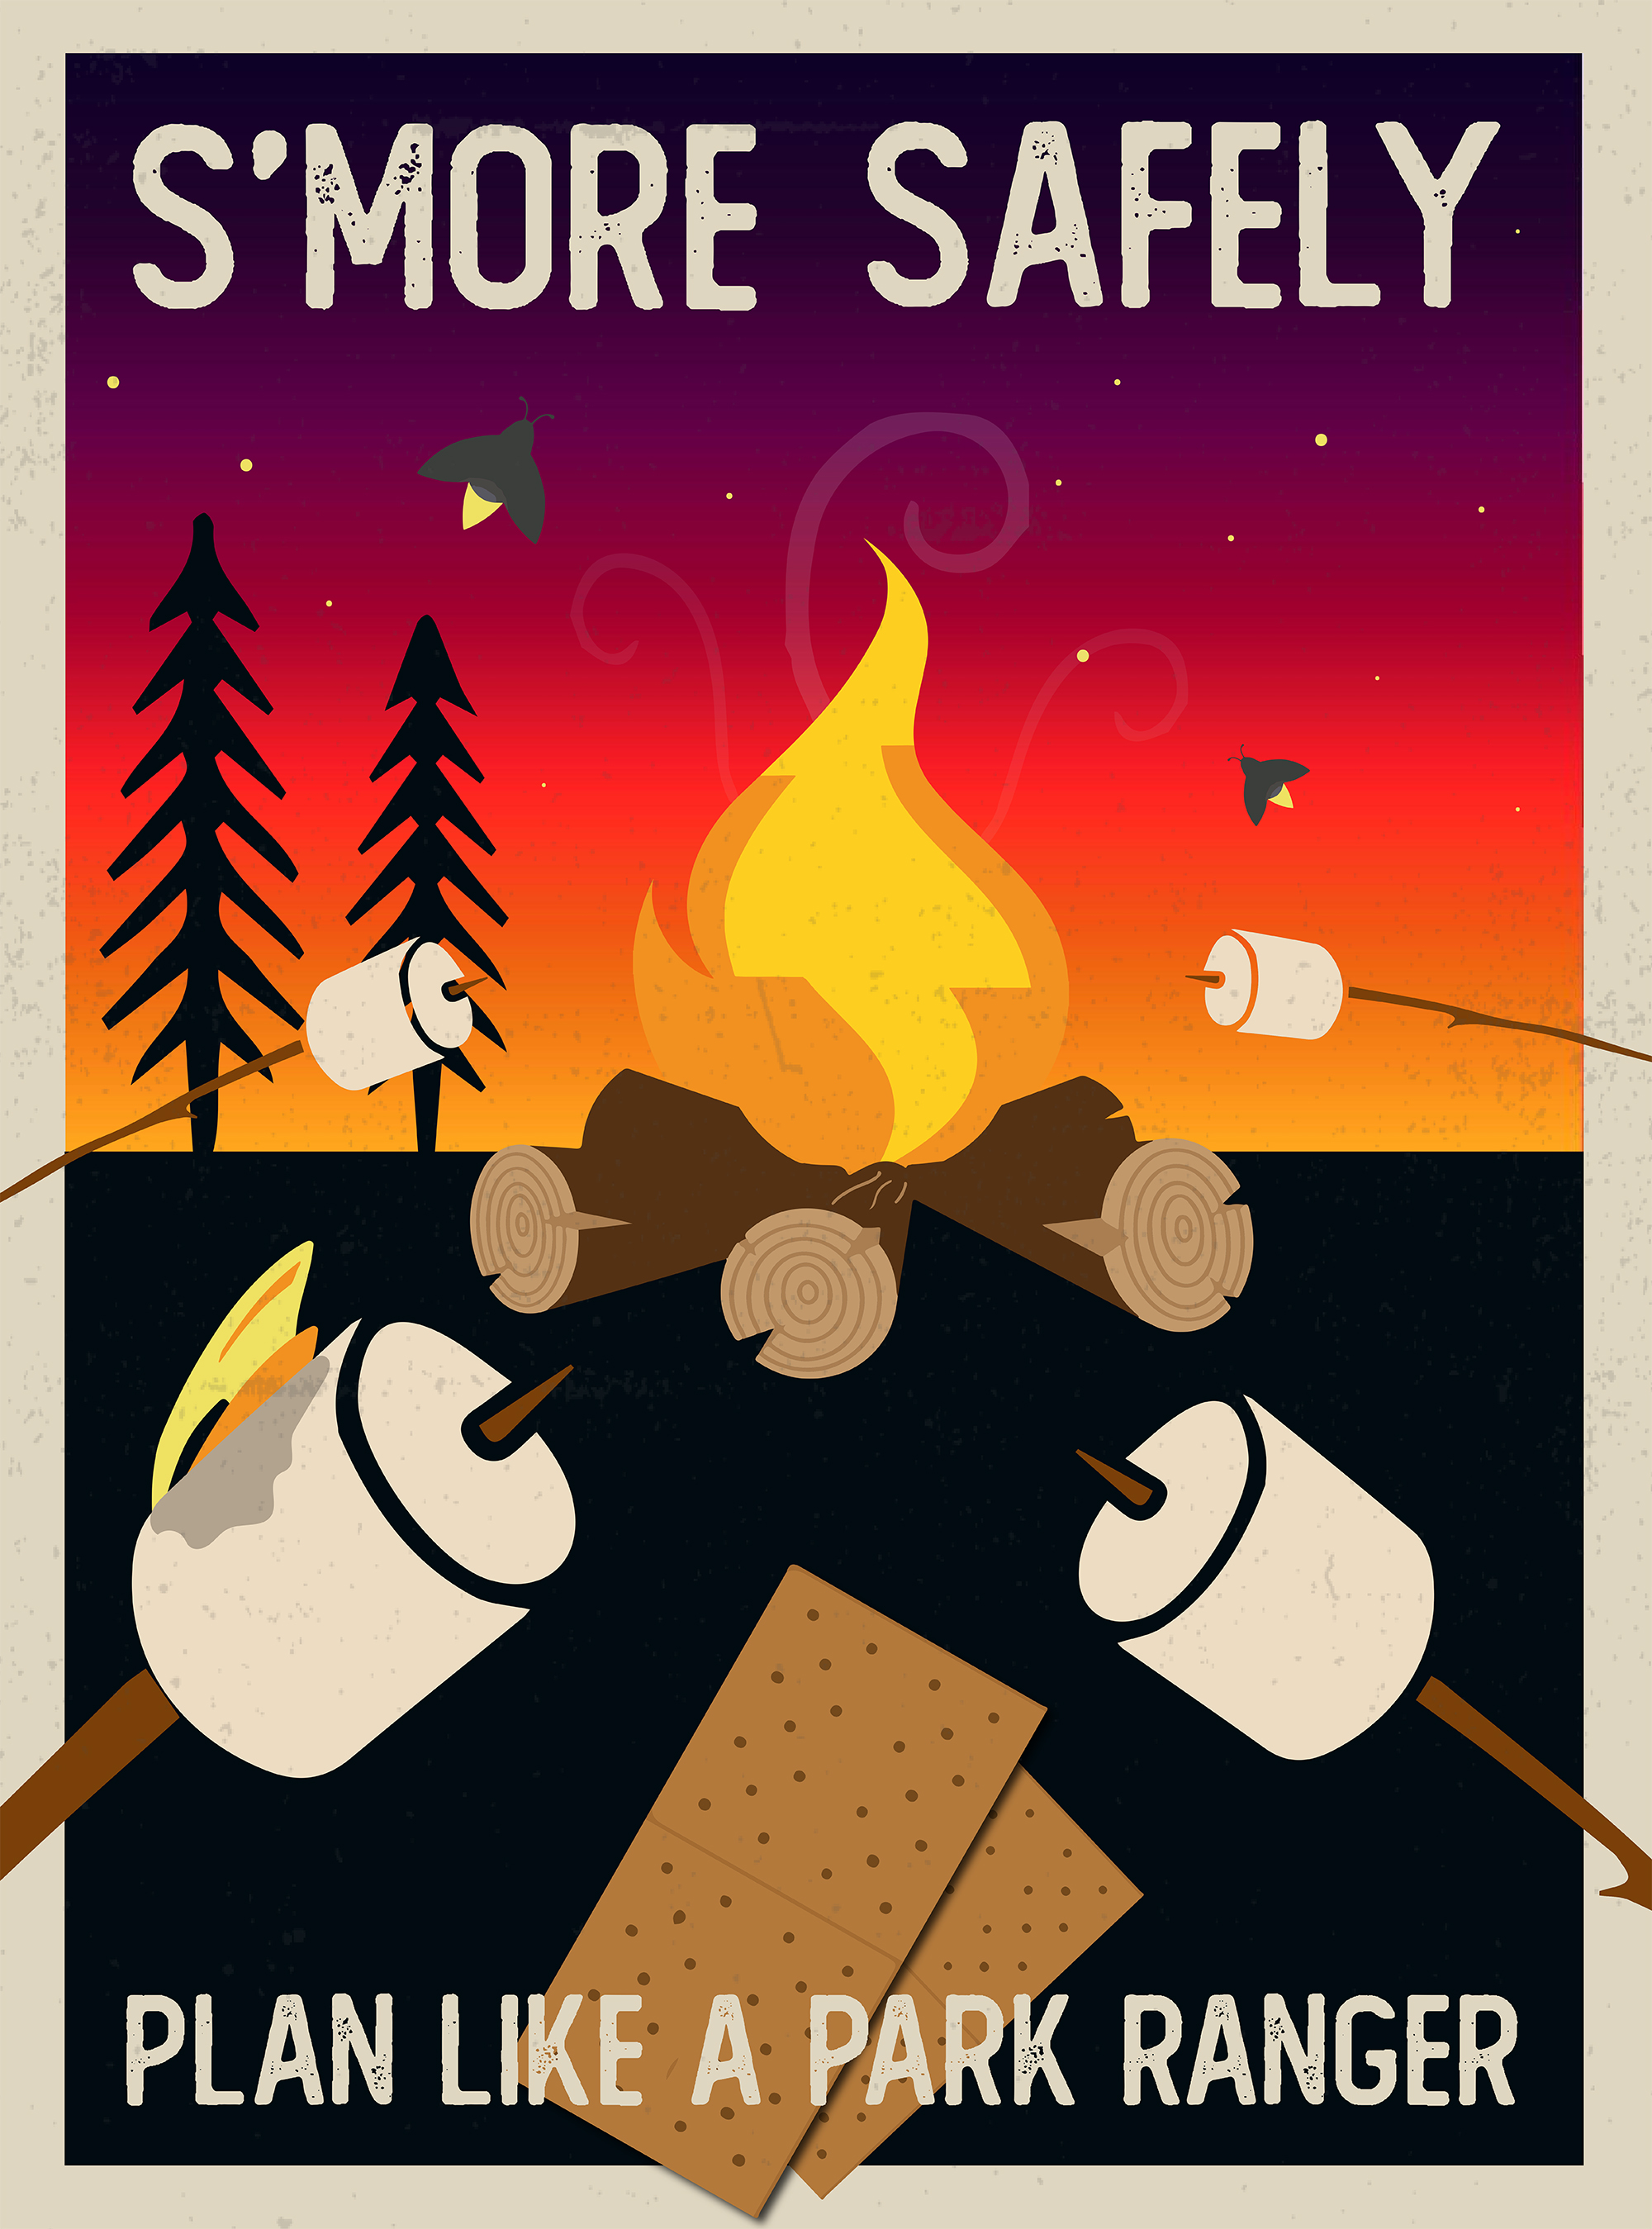 Graphic of a campfire and marshmallows roasting on sticks with the words "S'more Safely" at the top and "Plan Like A Park Ranger" at the bottom.